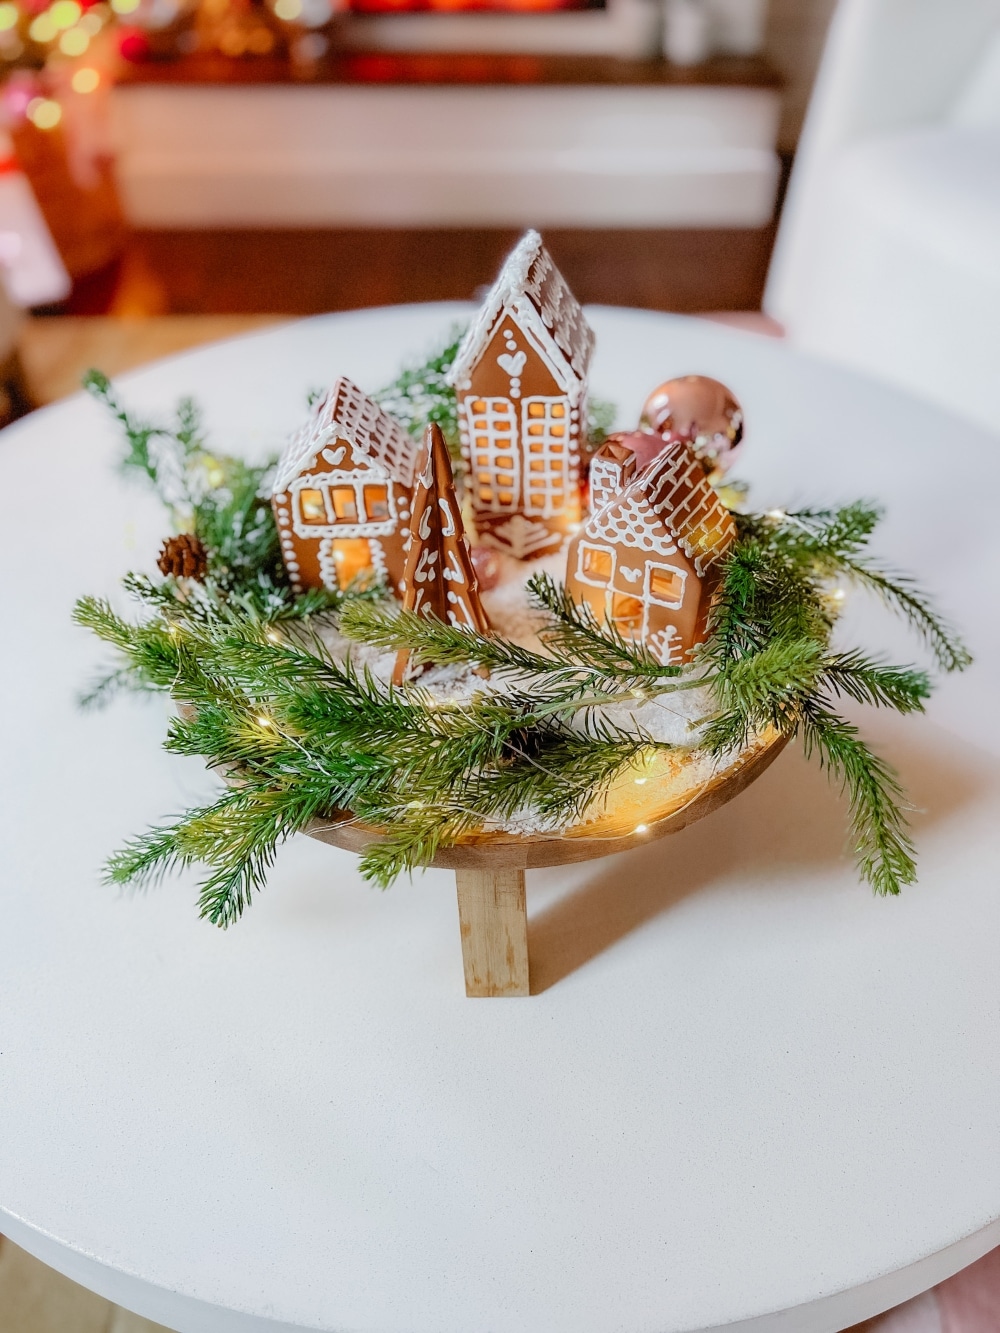 Christmas Painted Gingerbread House Vignette. Explore the magic of Christmas with a  Christmas Painted Gingerbread House Vignette, where plain white farmhouse houses are transformed into charming gingerbread creating a cozy feeling for the holiday season.